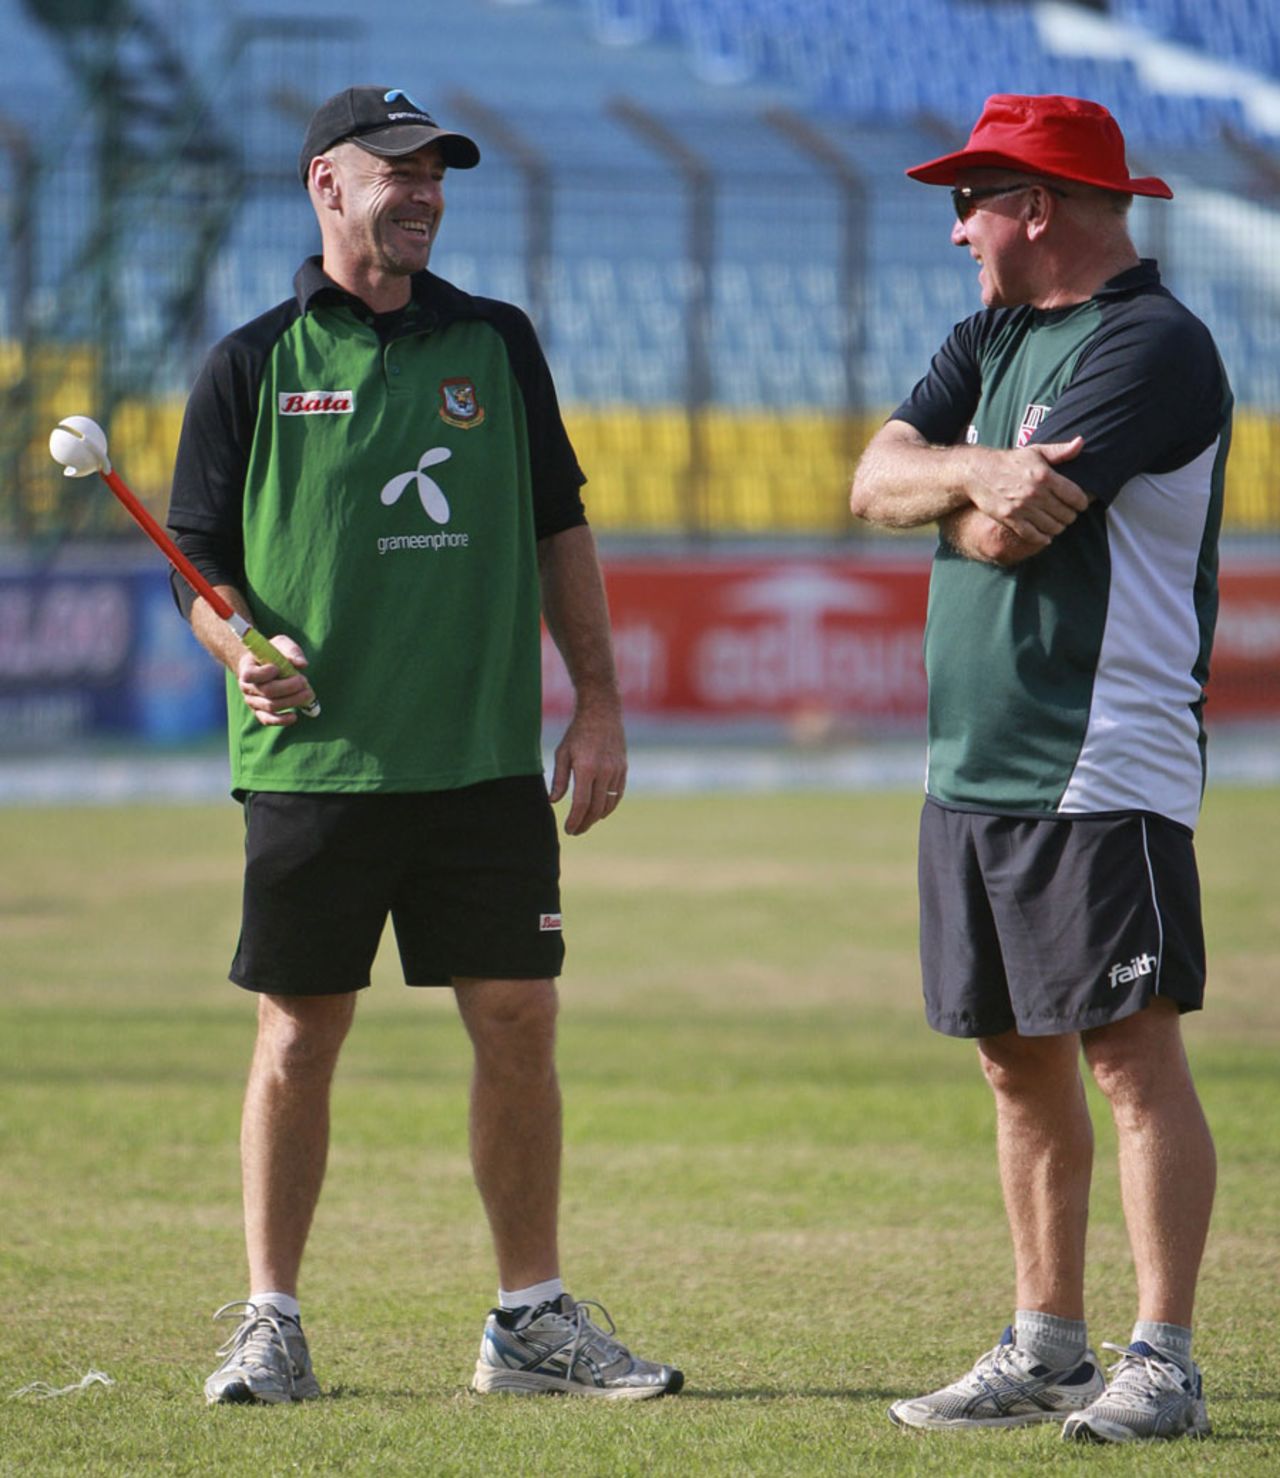 Zimbabwe coach Alan Butcher and Bangladesh coach Jamie Siddons stand on a wet outfield at the Zohur Ahmed Chowdhury Stadium, Chittagong, December 10, 2010